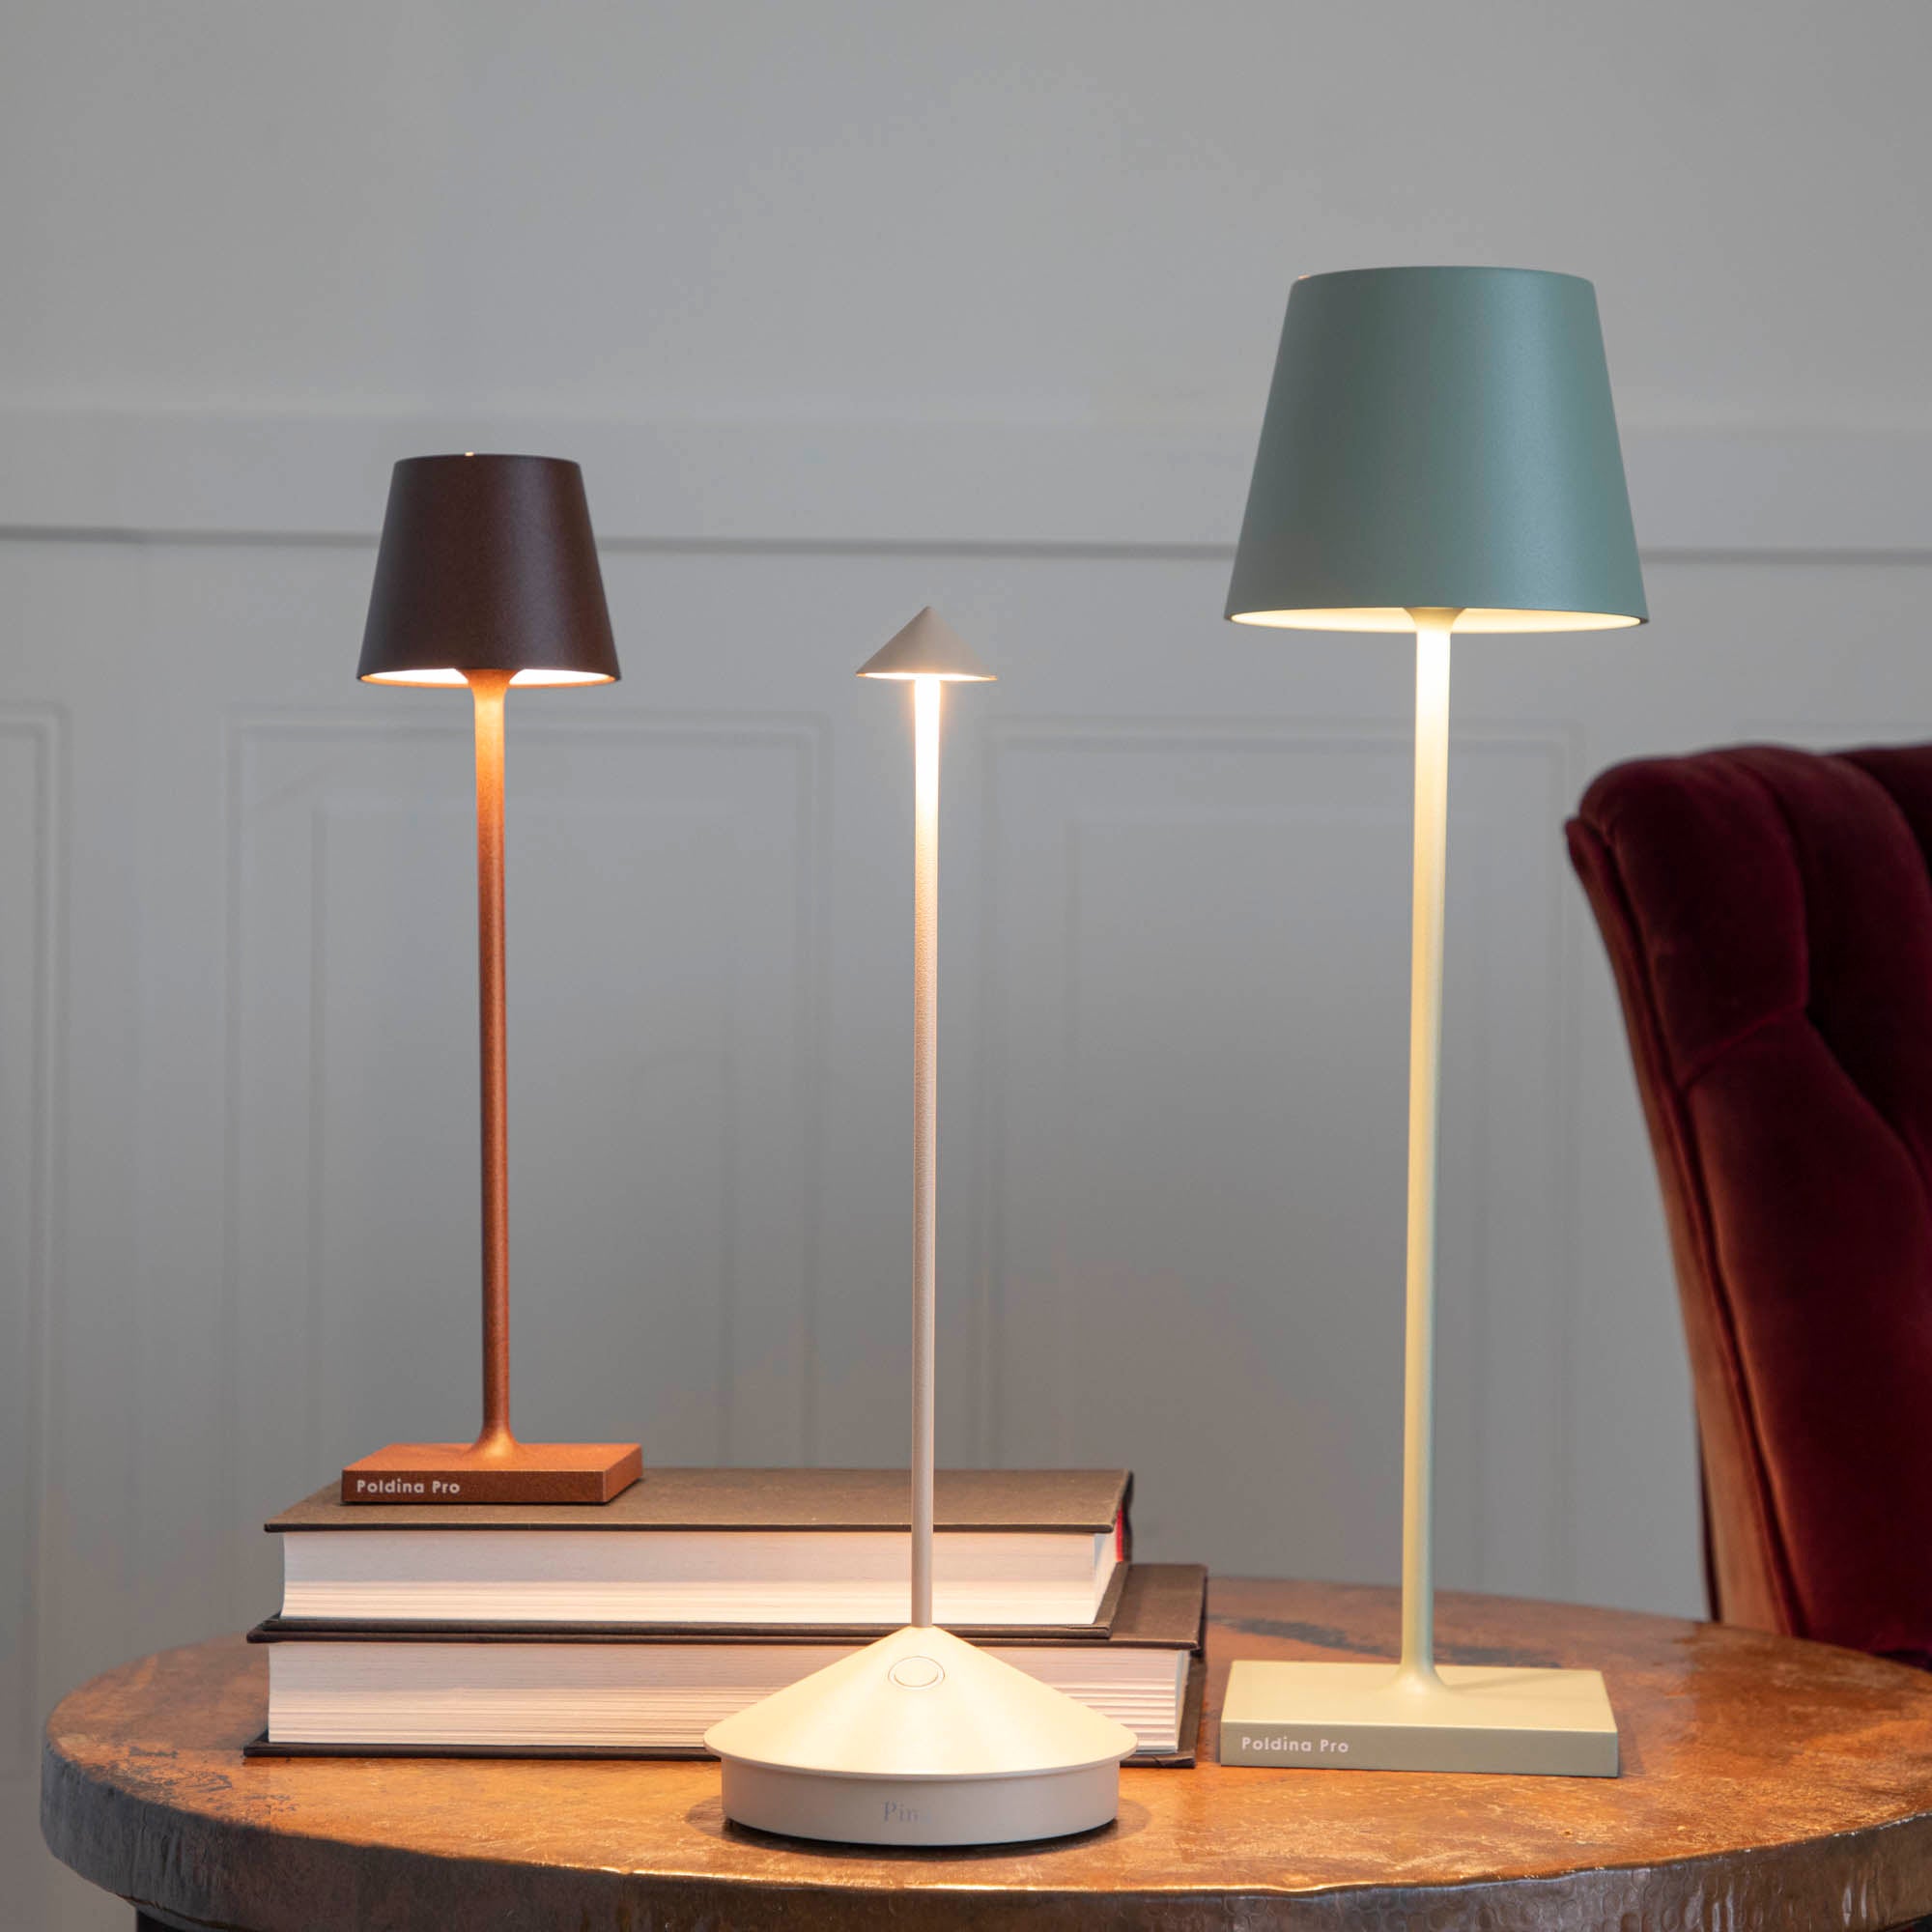 A Zafferano Dark Grey Micro Cordless Lamp on a table next to a book and a plant.